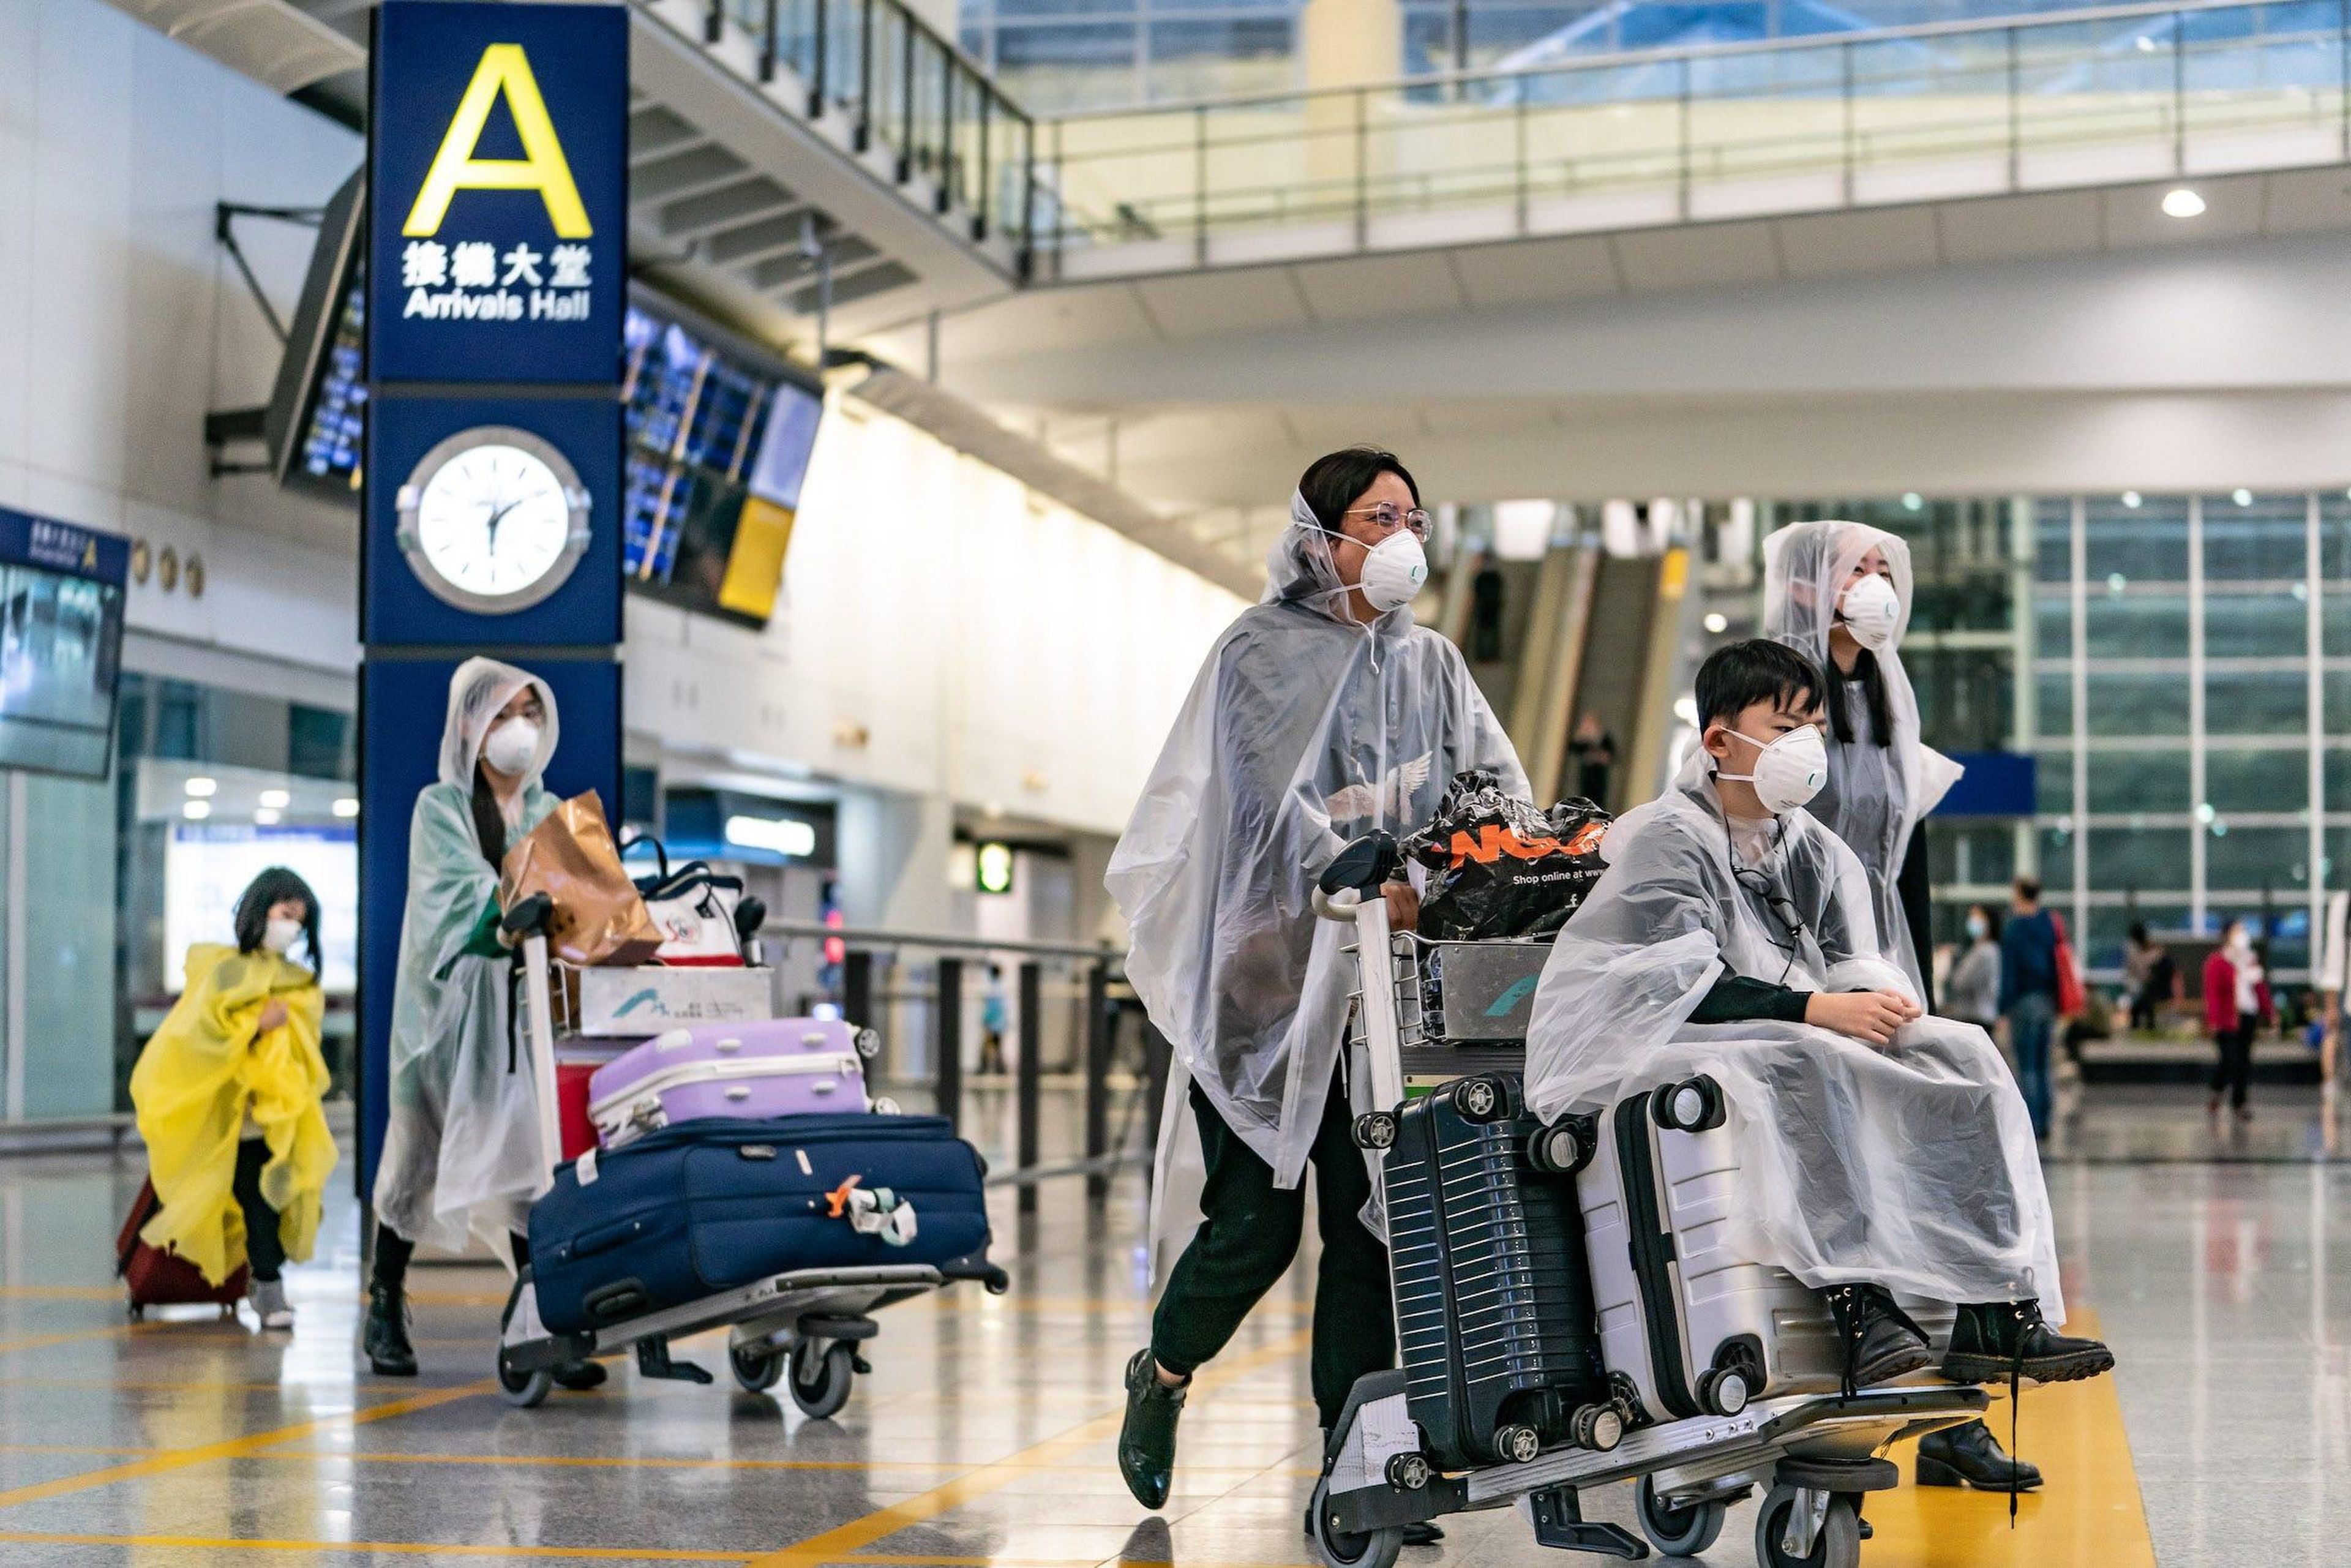 Travelers wearing protective equipment as a precautionary measure against COVID-19 enter the arrivals hall at Hong Kong International Airport on March 17, 2020 in Hong Kong, China. Anthony Kwan/Getty Images